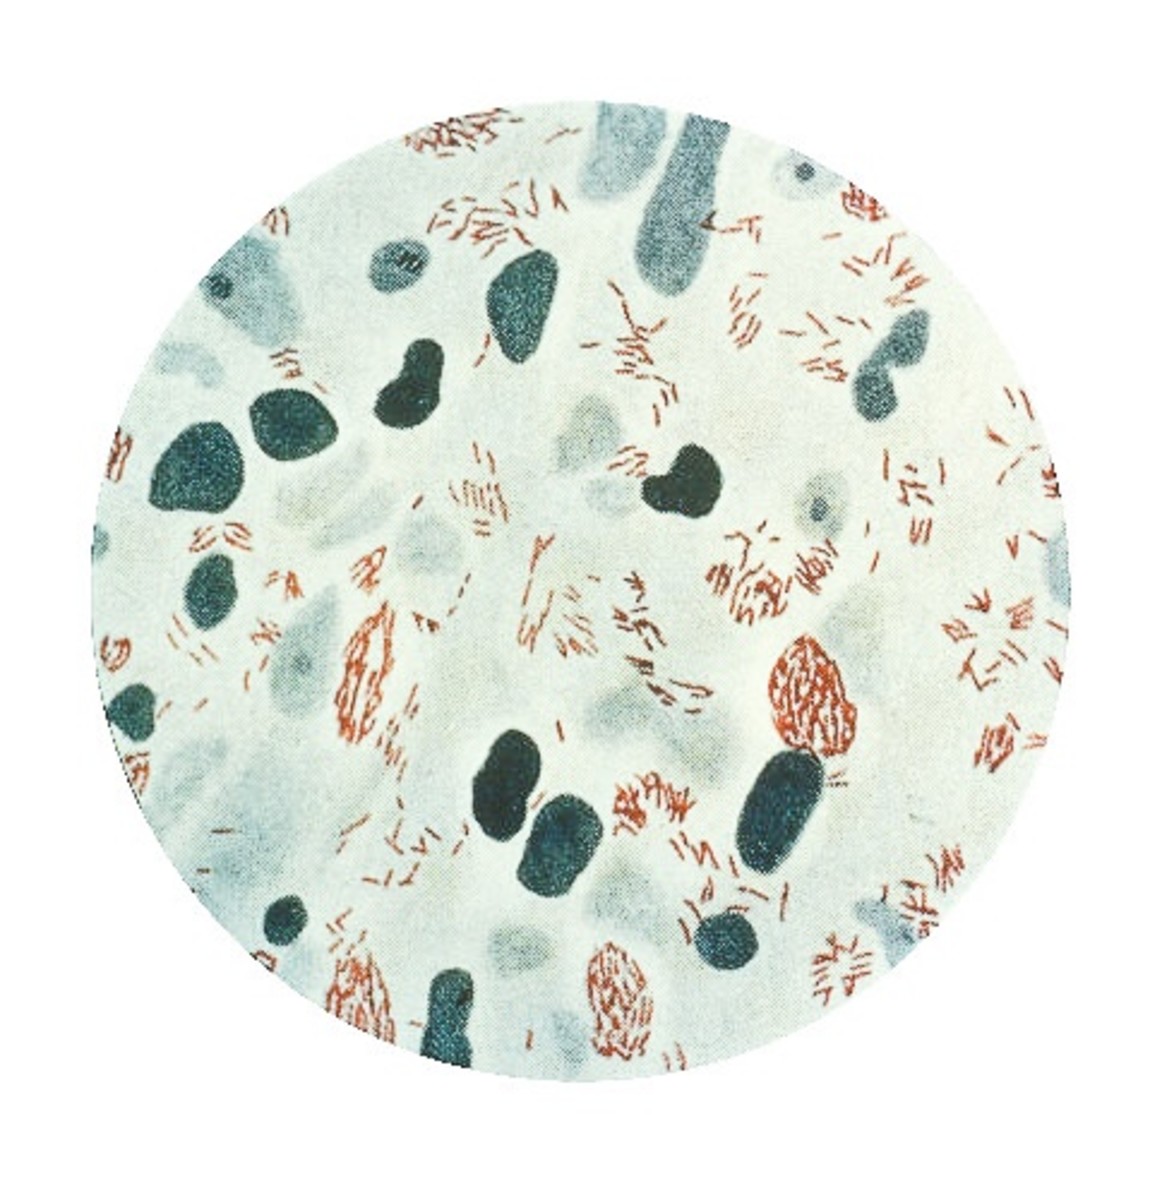 Mycobacterium leprae is the main cause of leprosy. The bacterium is stained red in this photo.